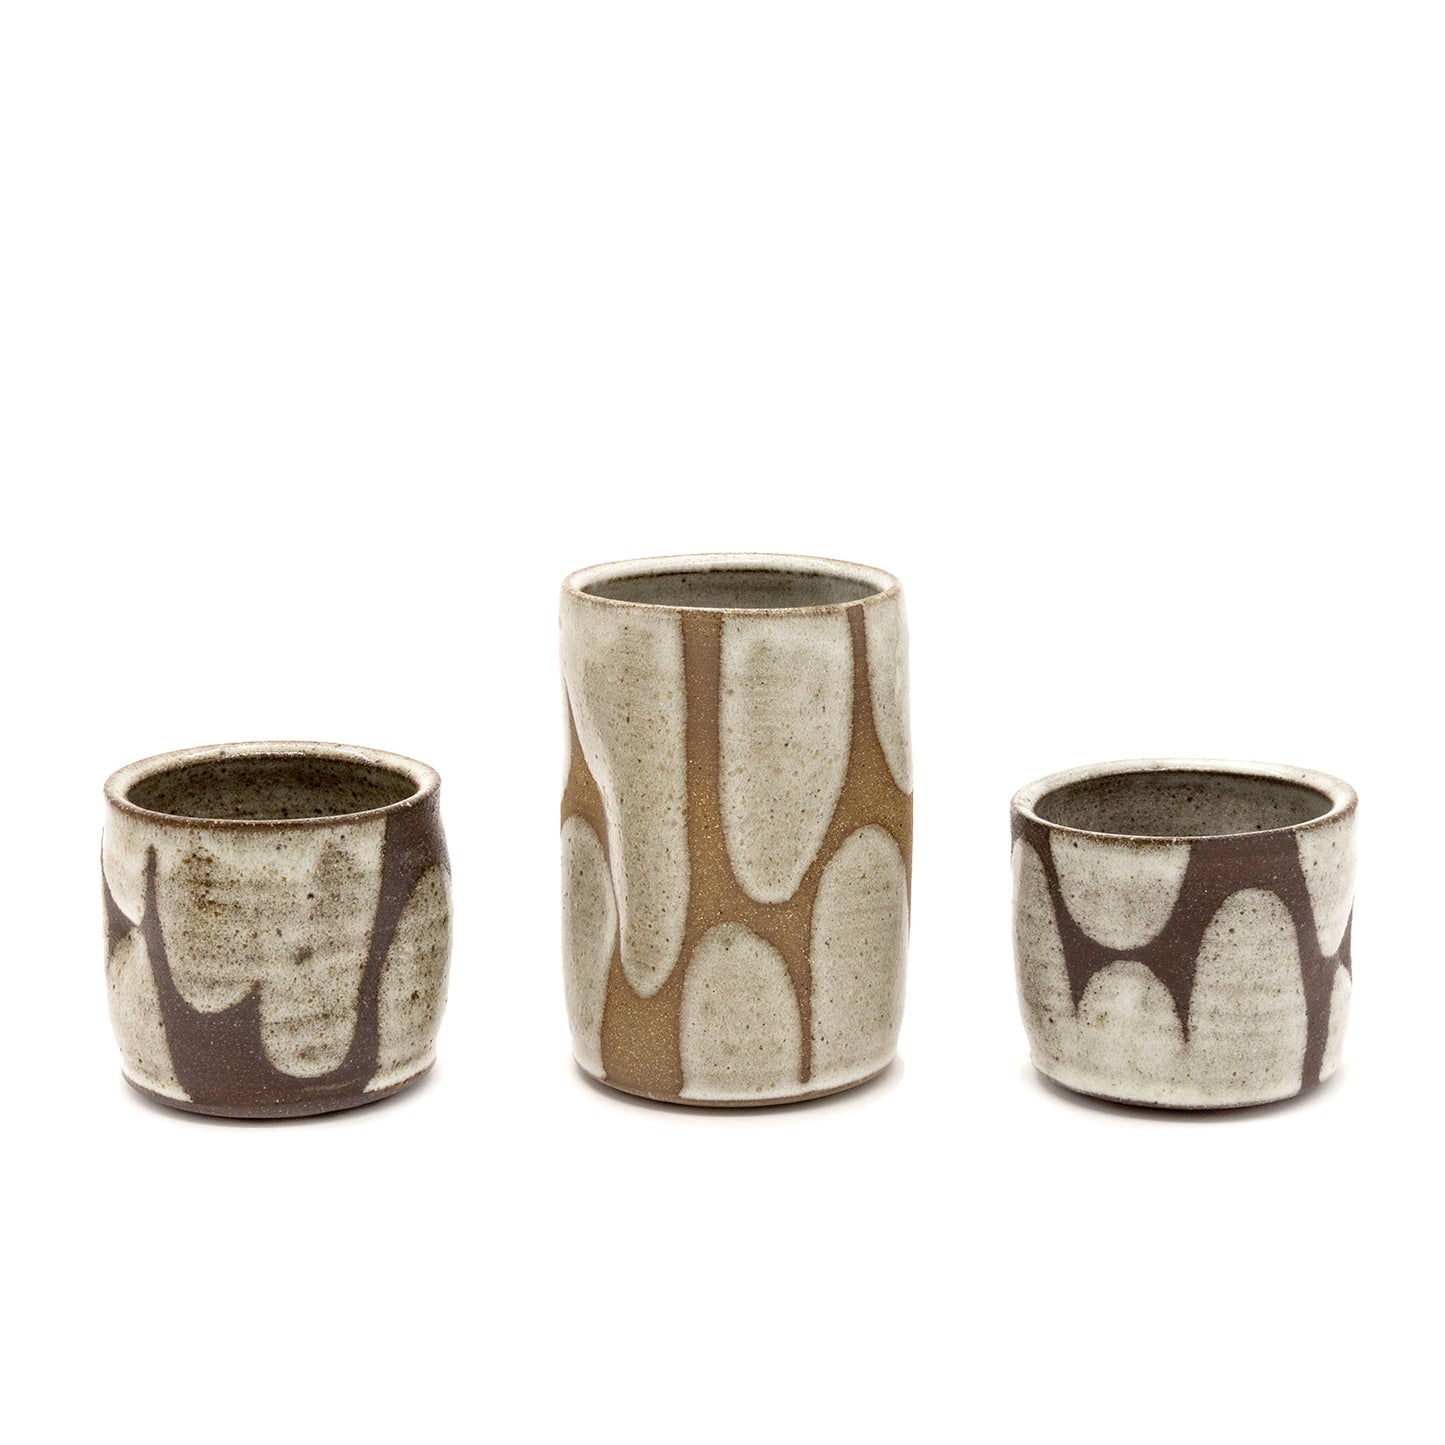 Cups and Tumblers by Kristen Erickson - Shapes